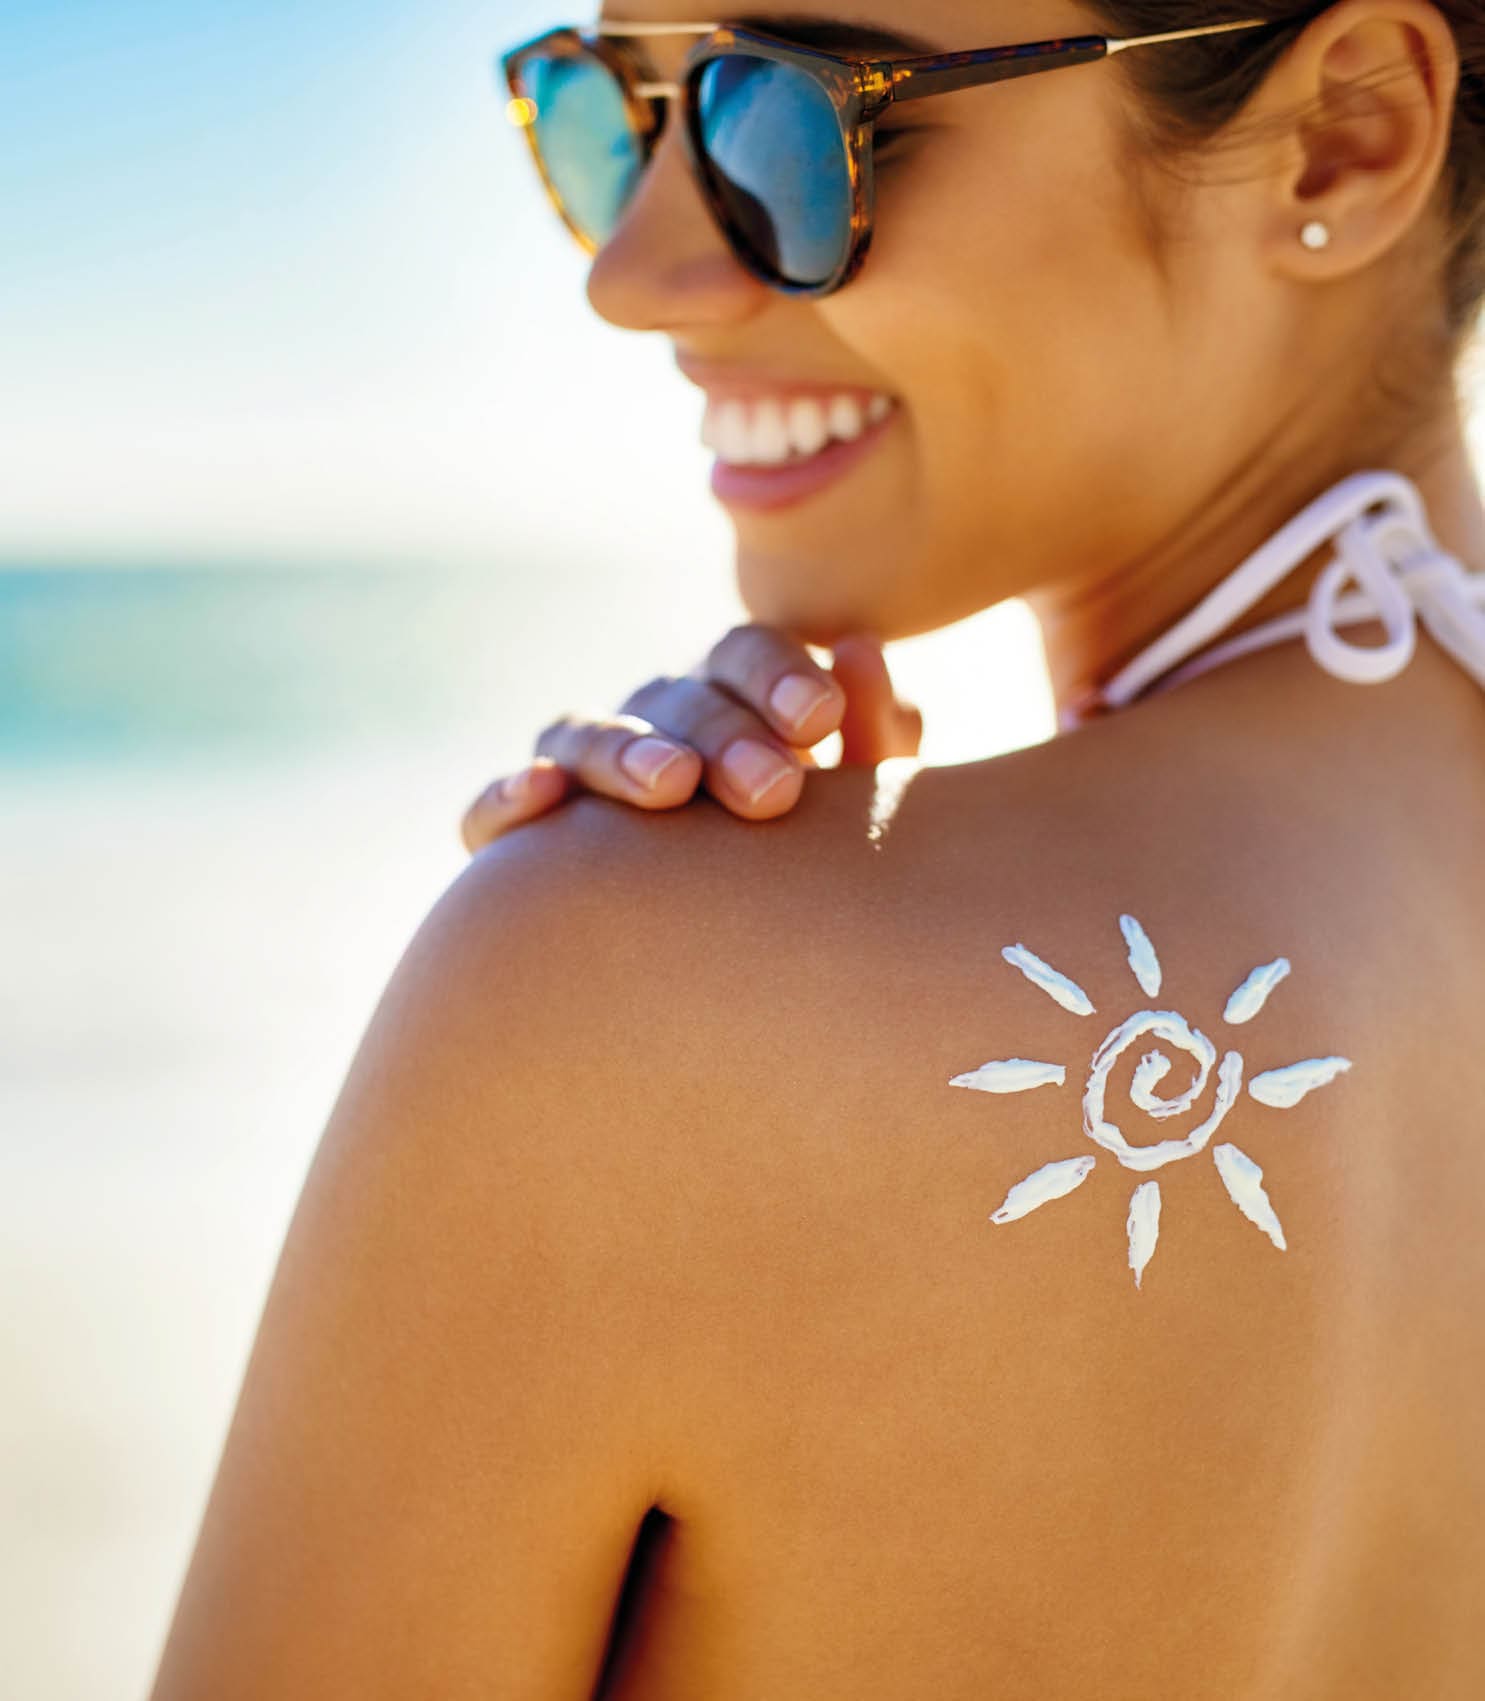 Cropped shot of a young woman posing with suntan lotion on her shoulder